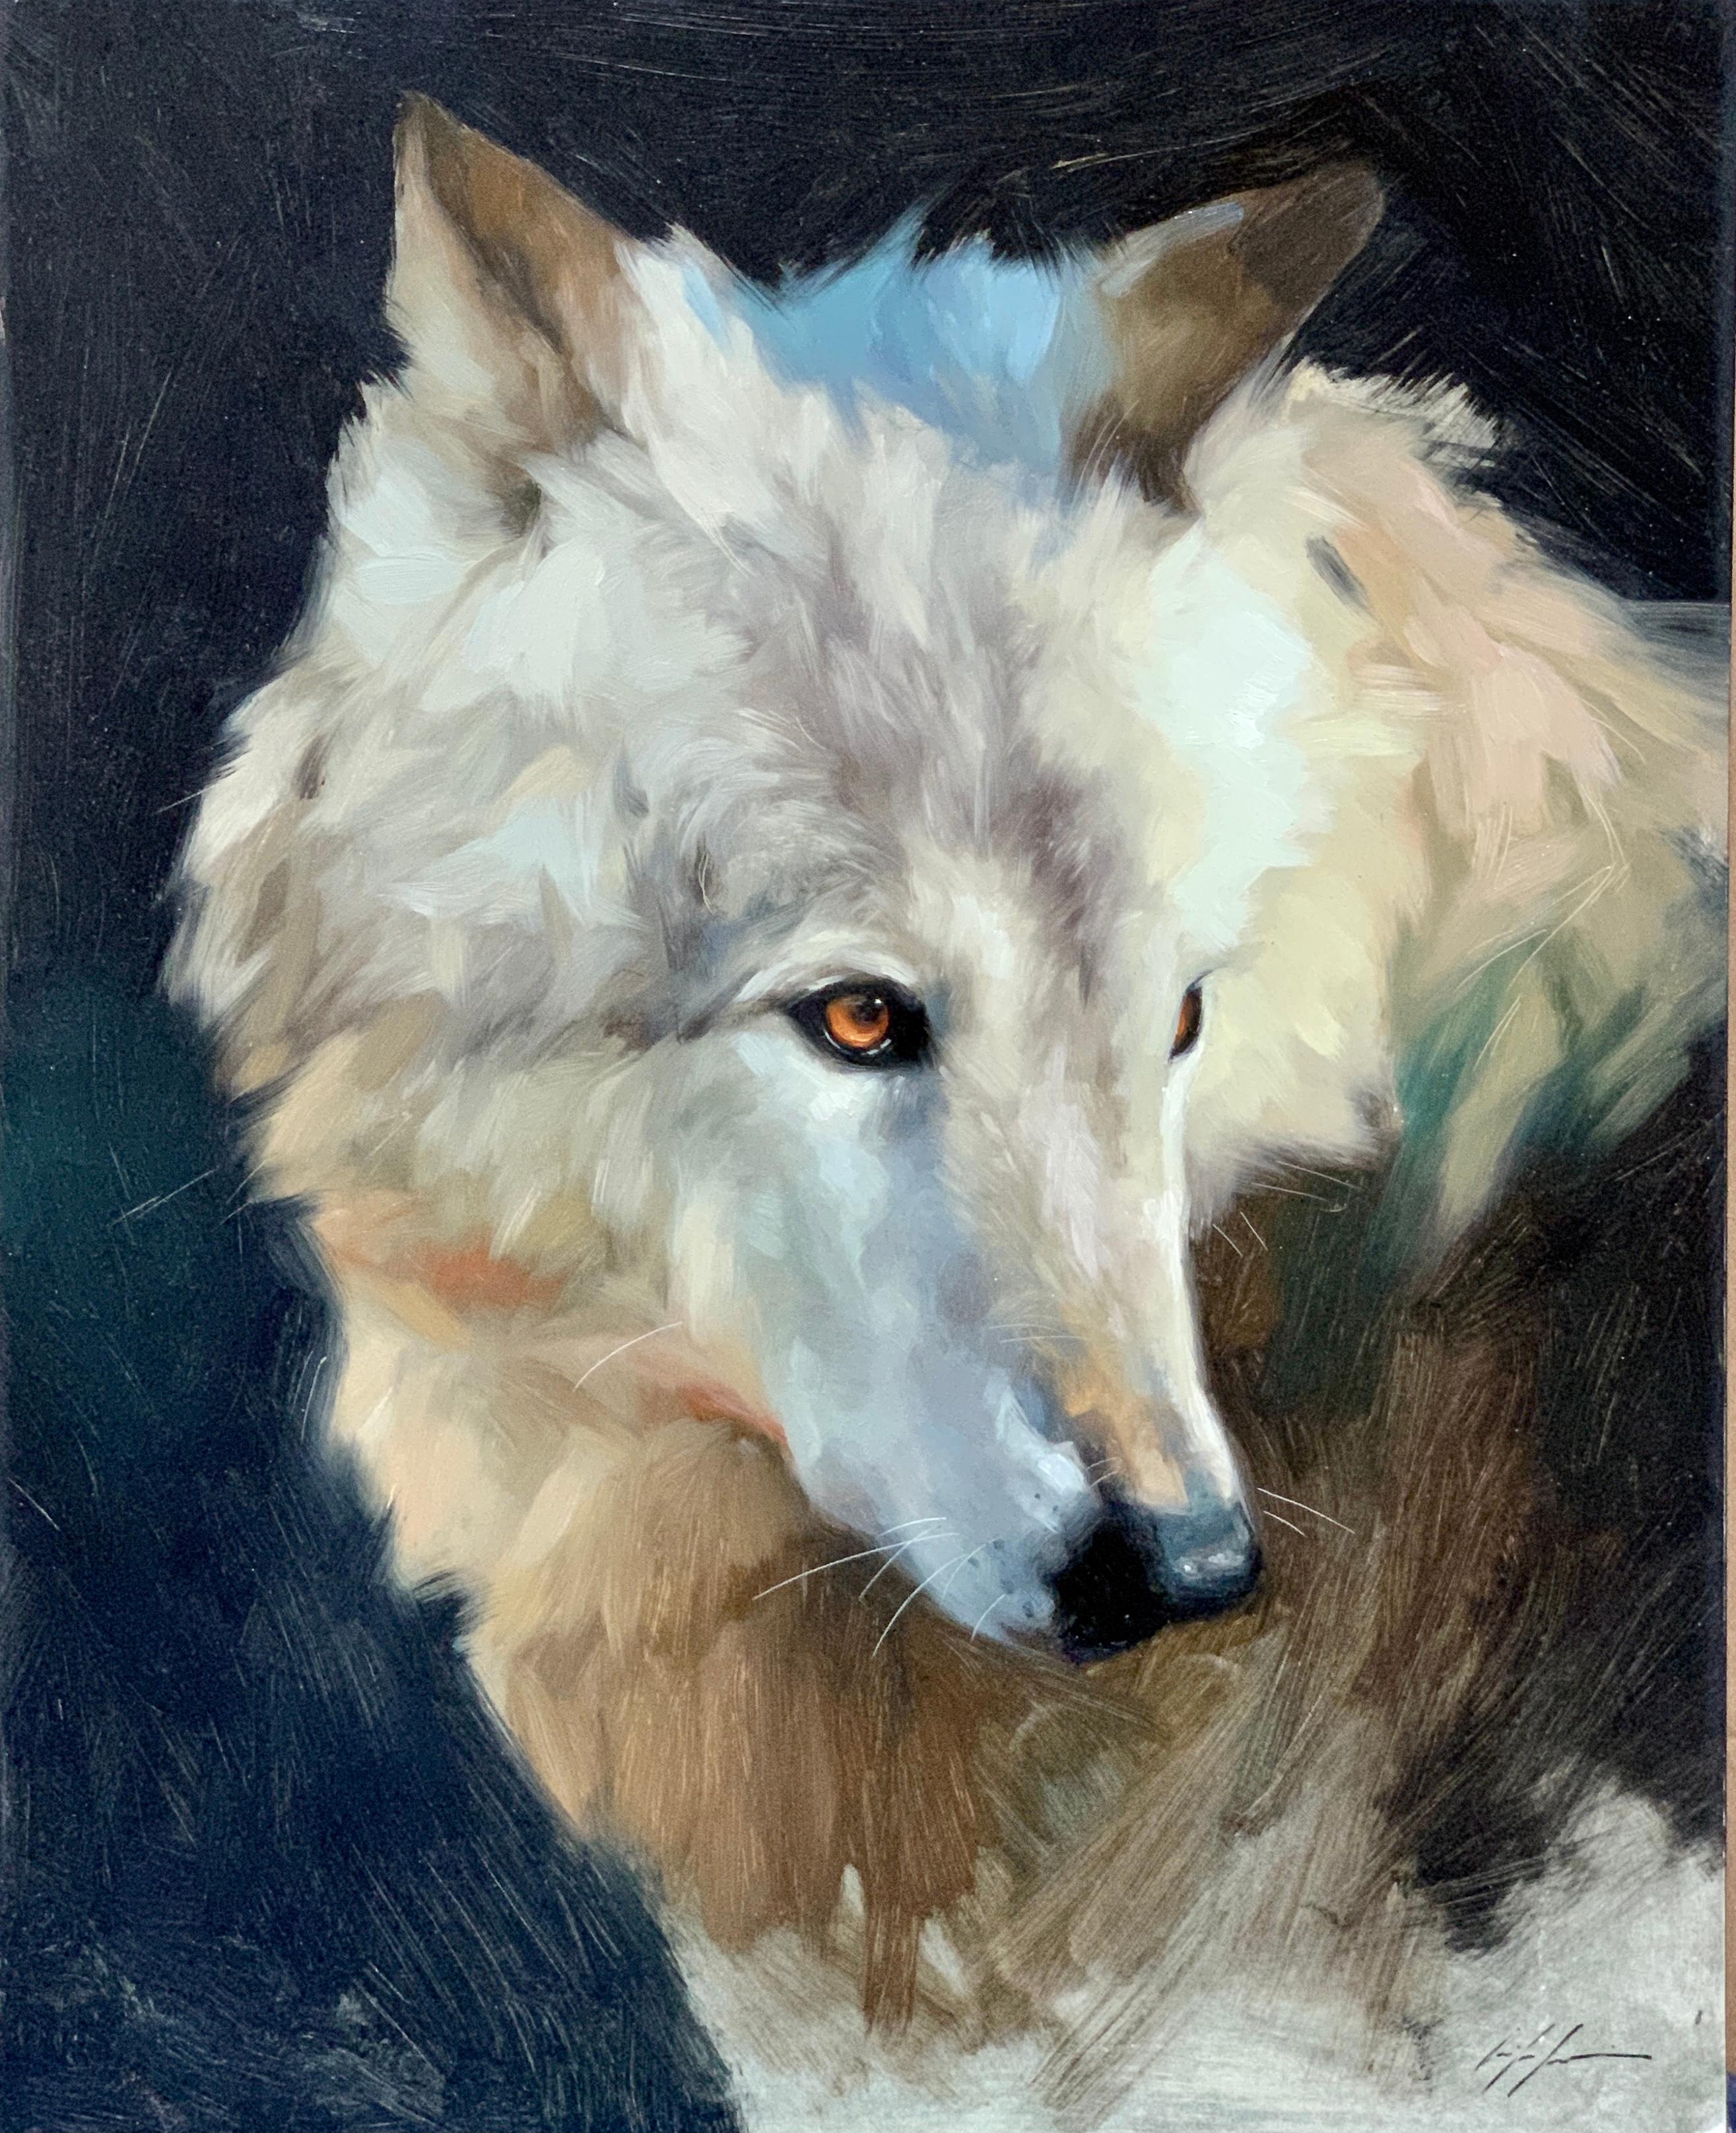 Realistic portrait study of an American Wolf, in a landscape - Painting by Jennifer Gennari